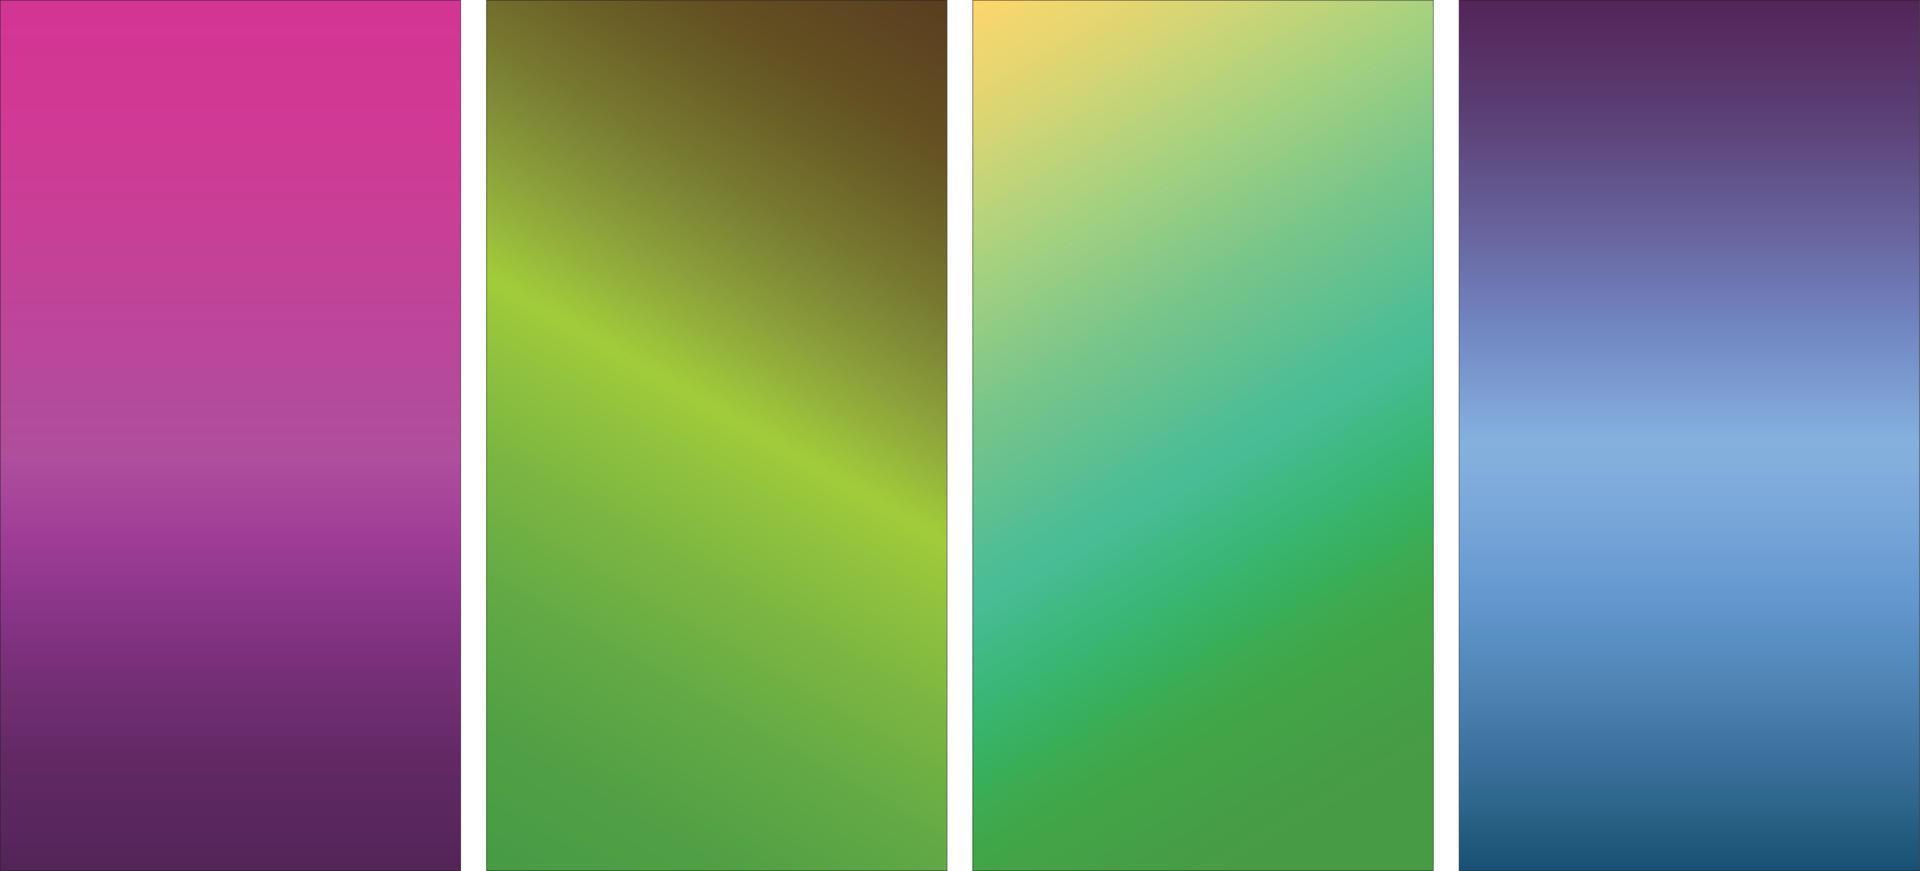 soft and gradient for wallpapers vector